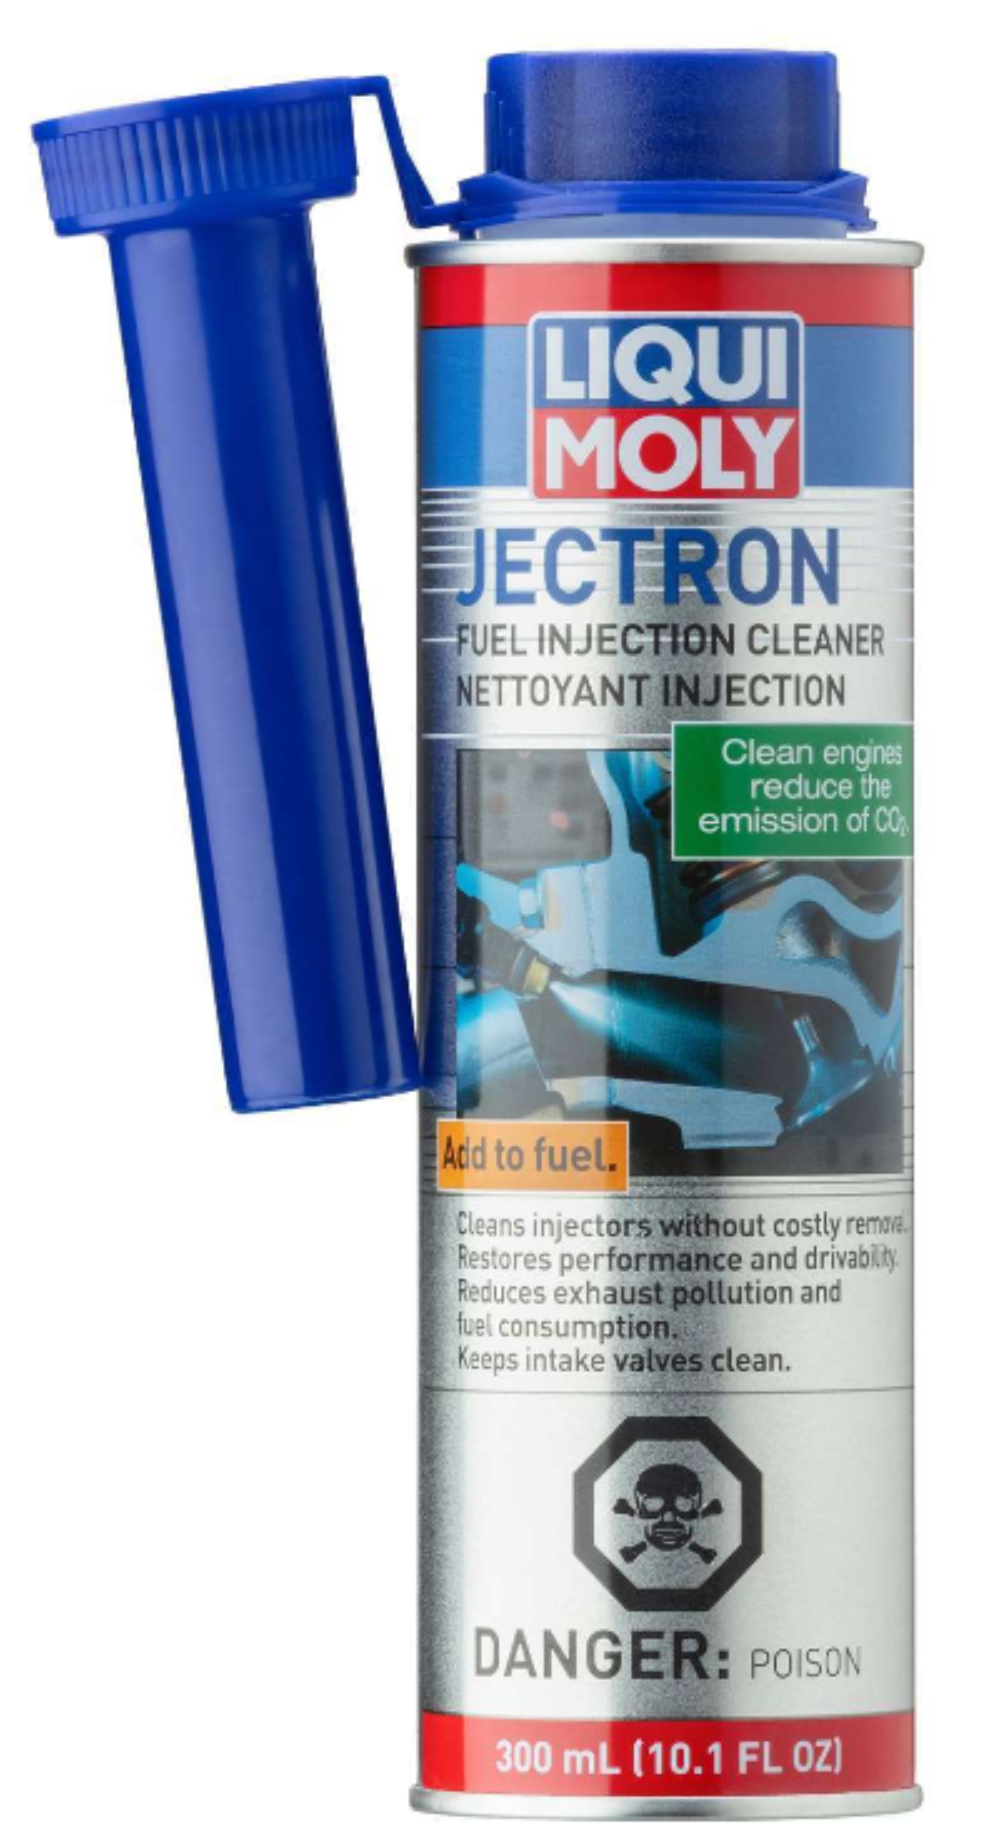 Jectron Fuel Injection Cleaner (300ml Can) - Liqui Moly LM7711